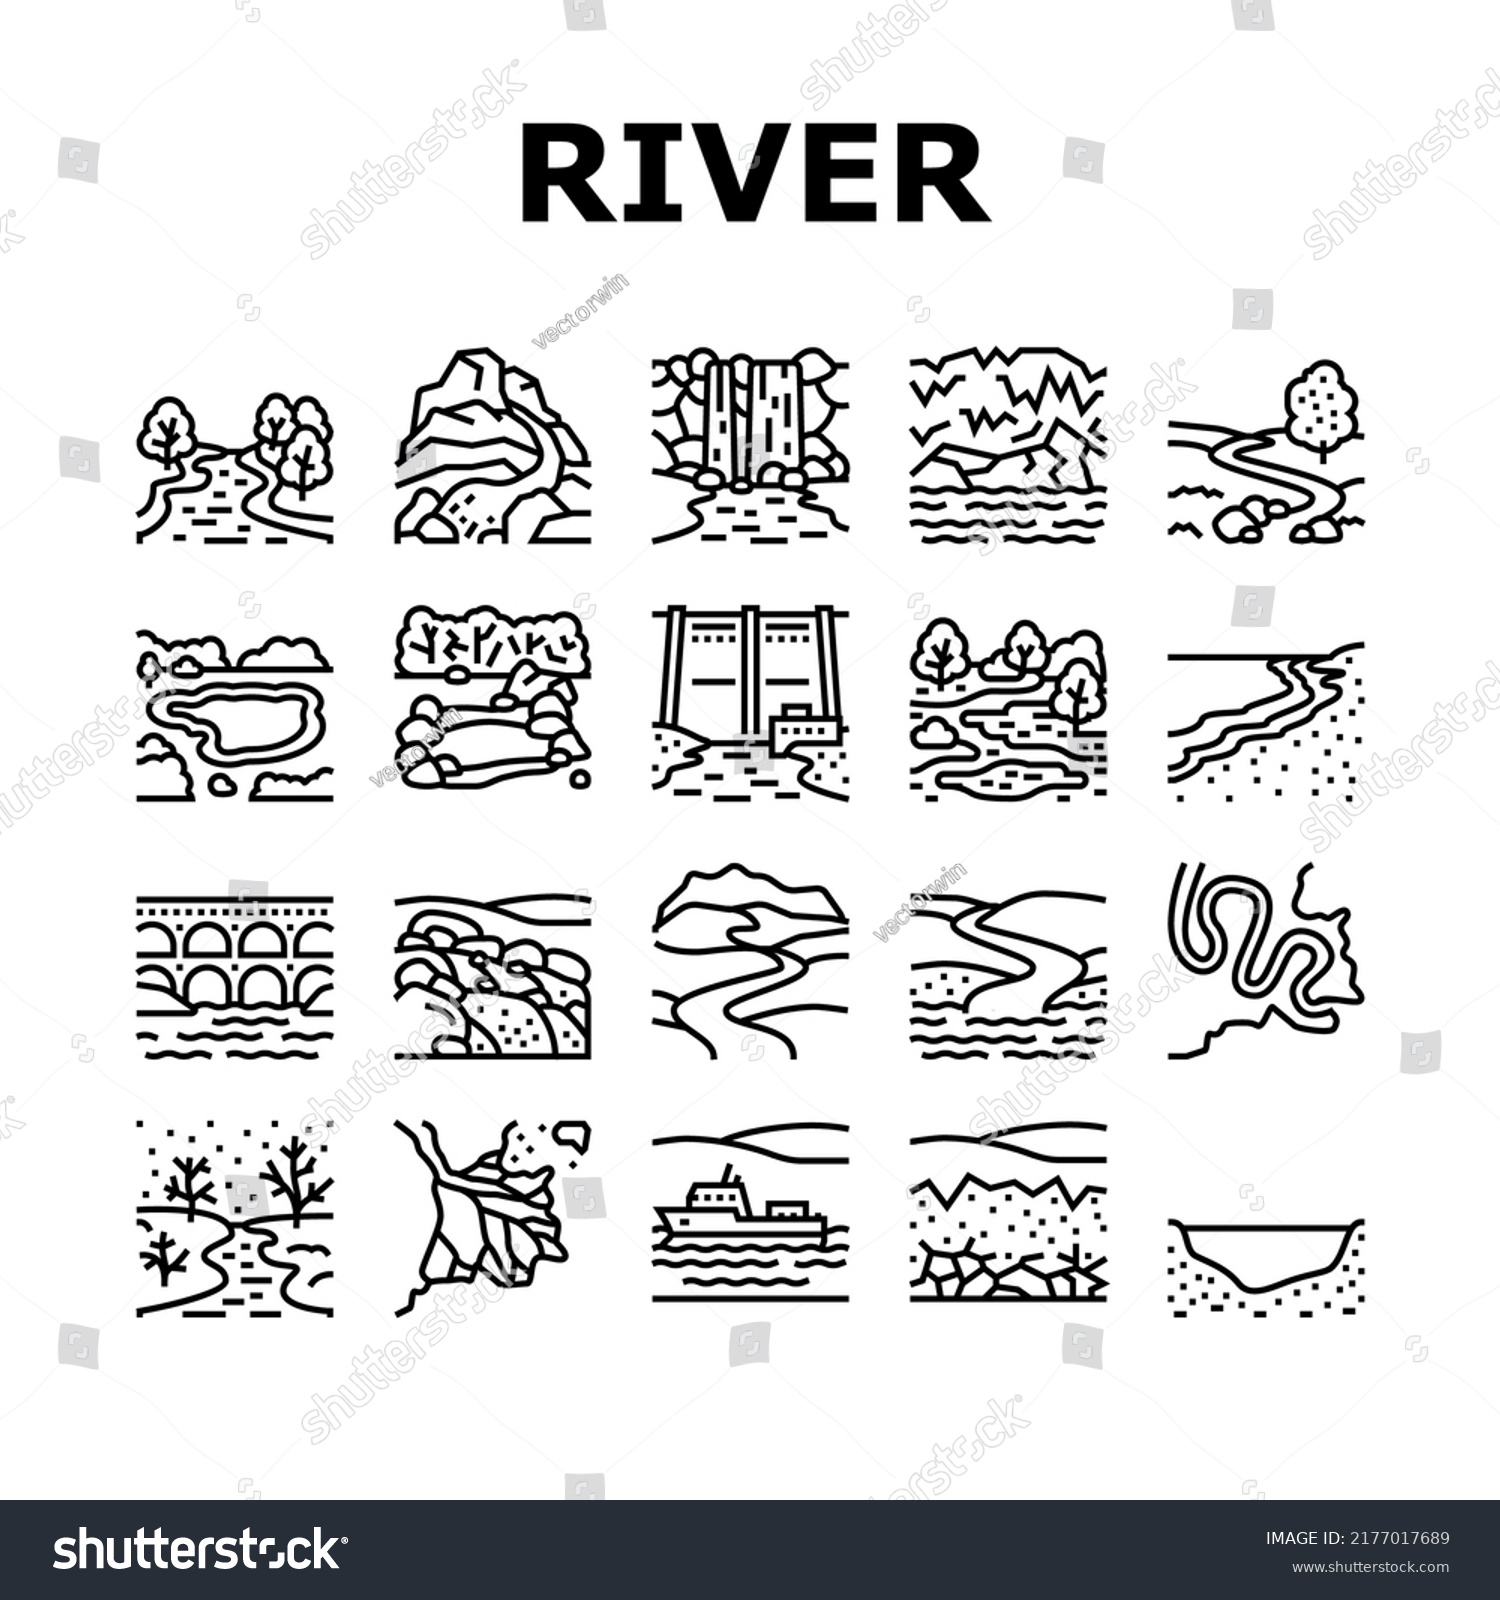 SVG of River And Lake Nature Landscape Icons Set Vector. River Mouth And Delta, Sea Shore And Pond In Forest, Aqueduct Construction And Dam. Waterfall And Water Reservoir Black Contour Illustrations svg